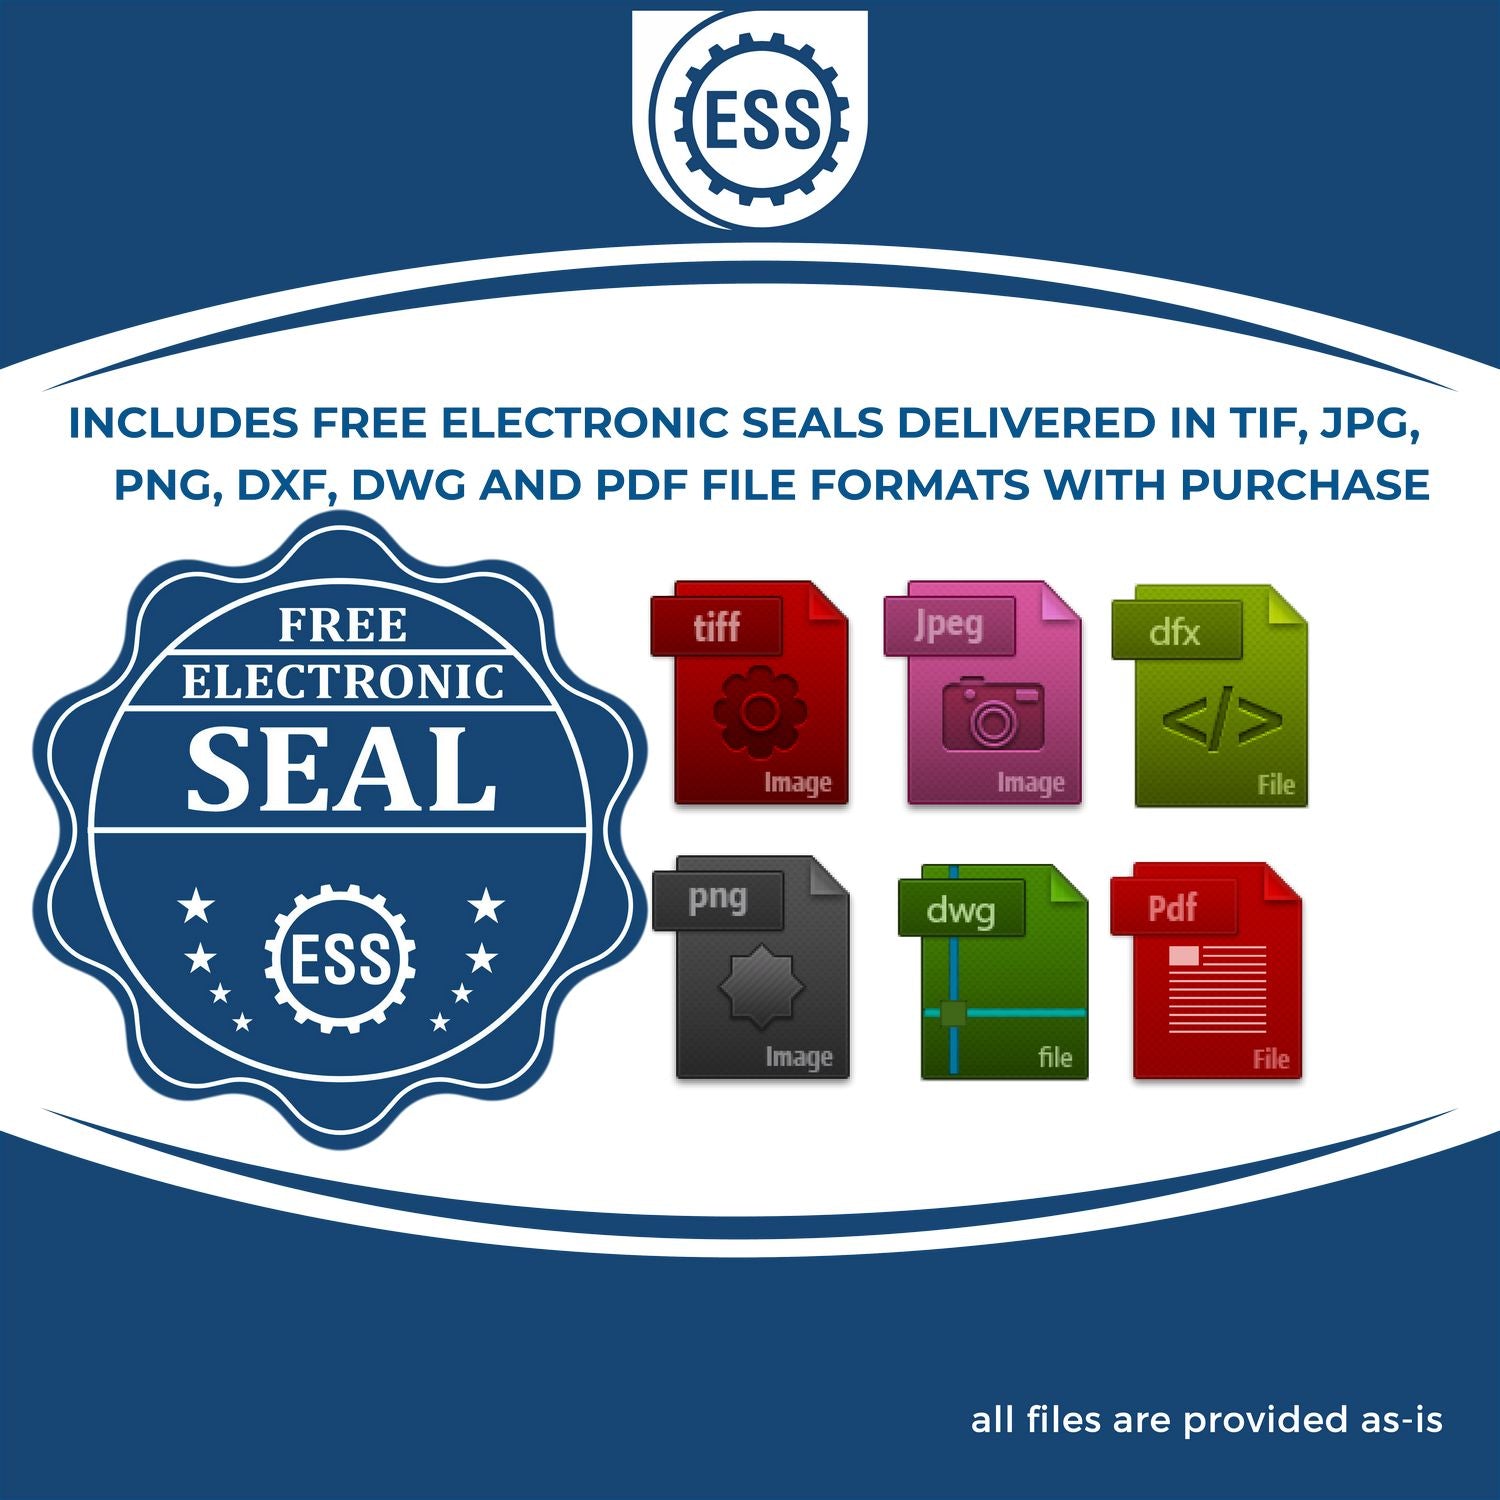 An infographic for the free electronic seal for the Tennessee Long Reach Landscape Architect Embossing Stamp illustrating the different file type icons such as DXF, DWG, TIF, JPG and PNG.